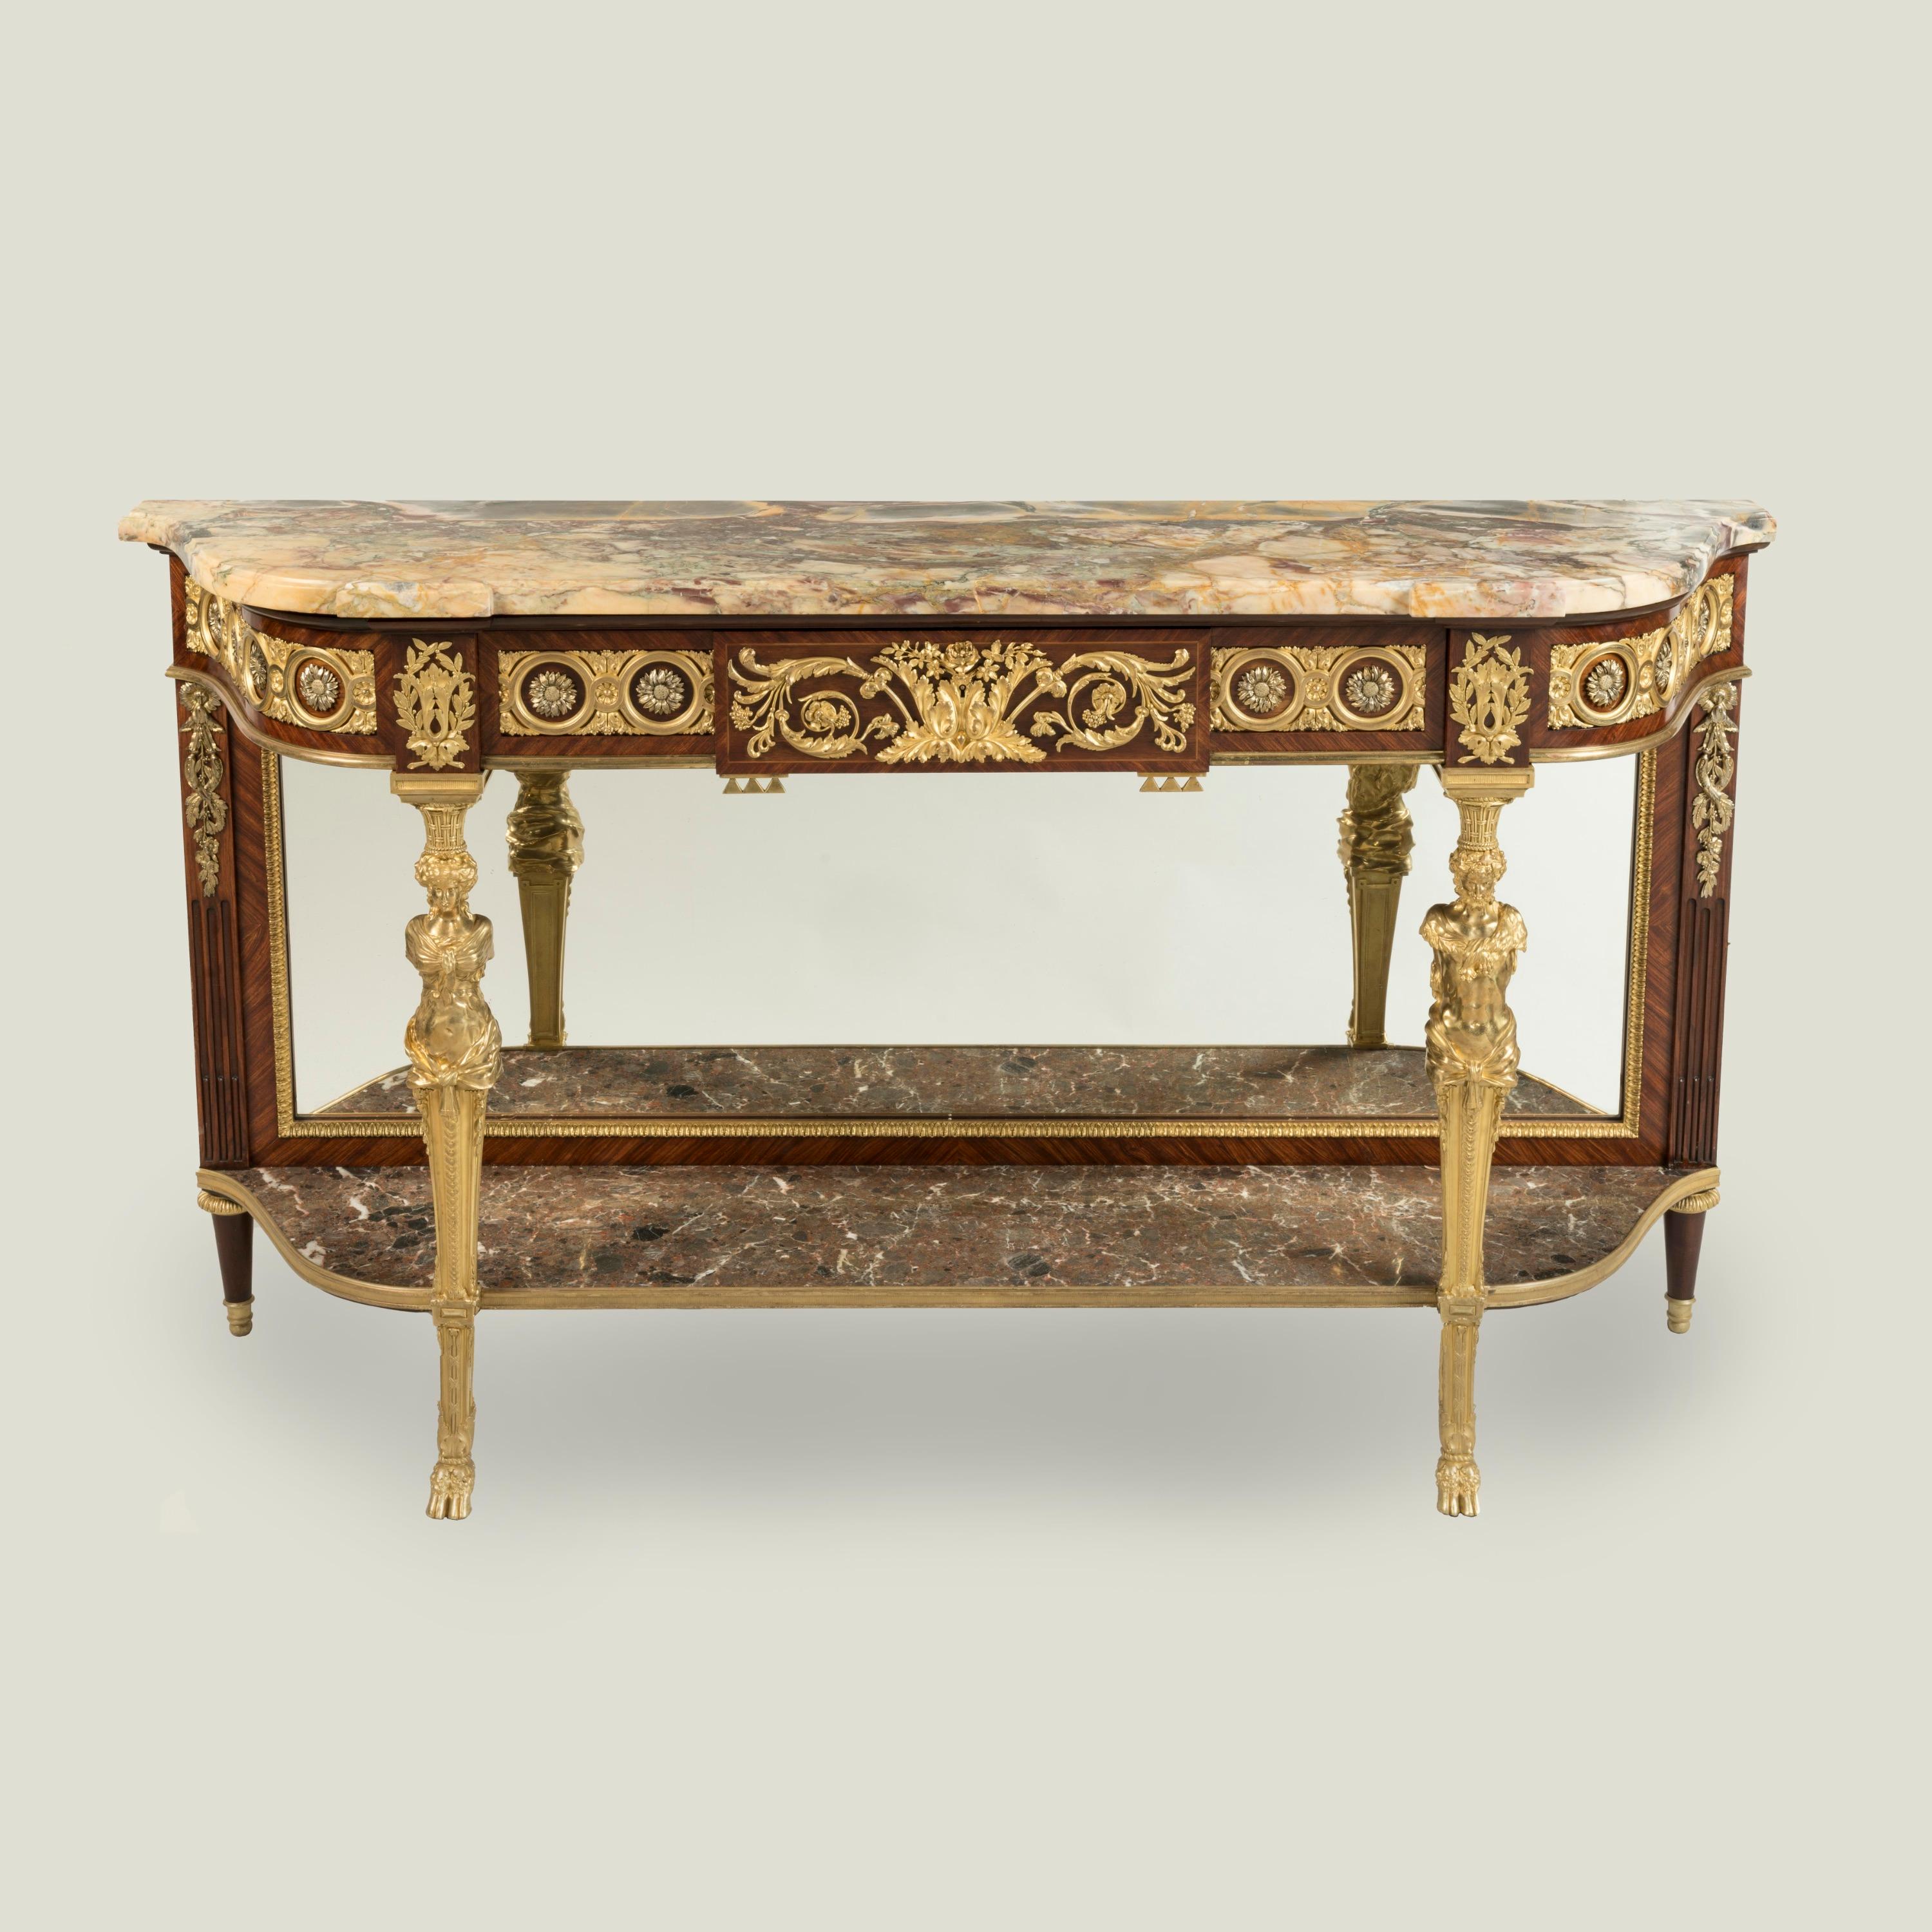 An Important Louis XVI Style Console Table

A superb example of Parisian craftsmanship, constructed from Kingwood and dressed with well-cast and hand-chased gilt and silvered bronze mounts; of arc-en-arbalète outline, with two ormolu figural front